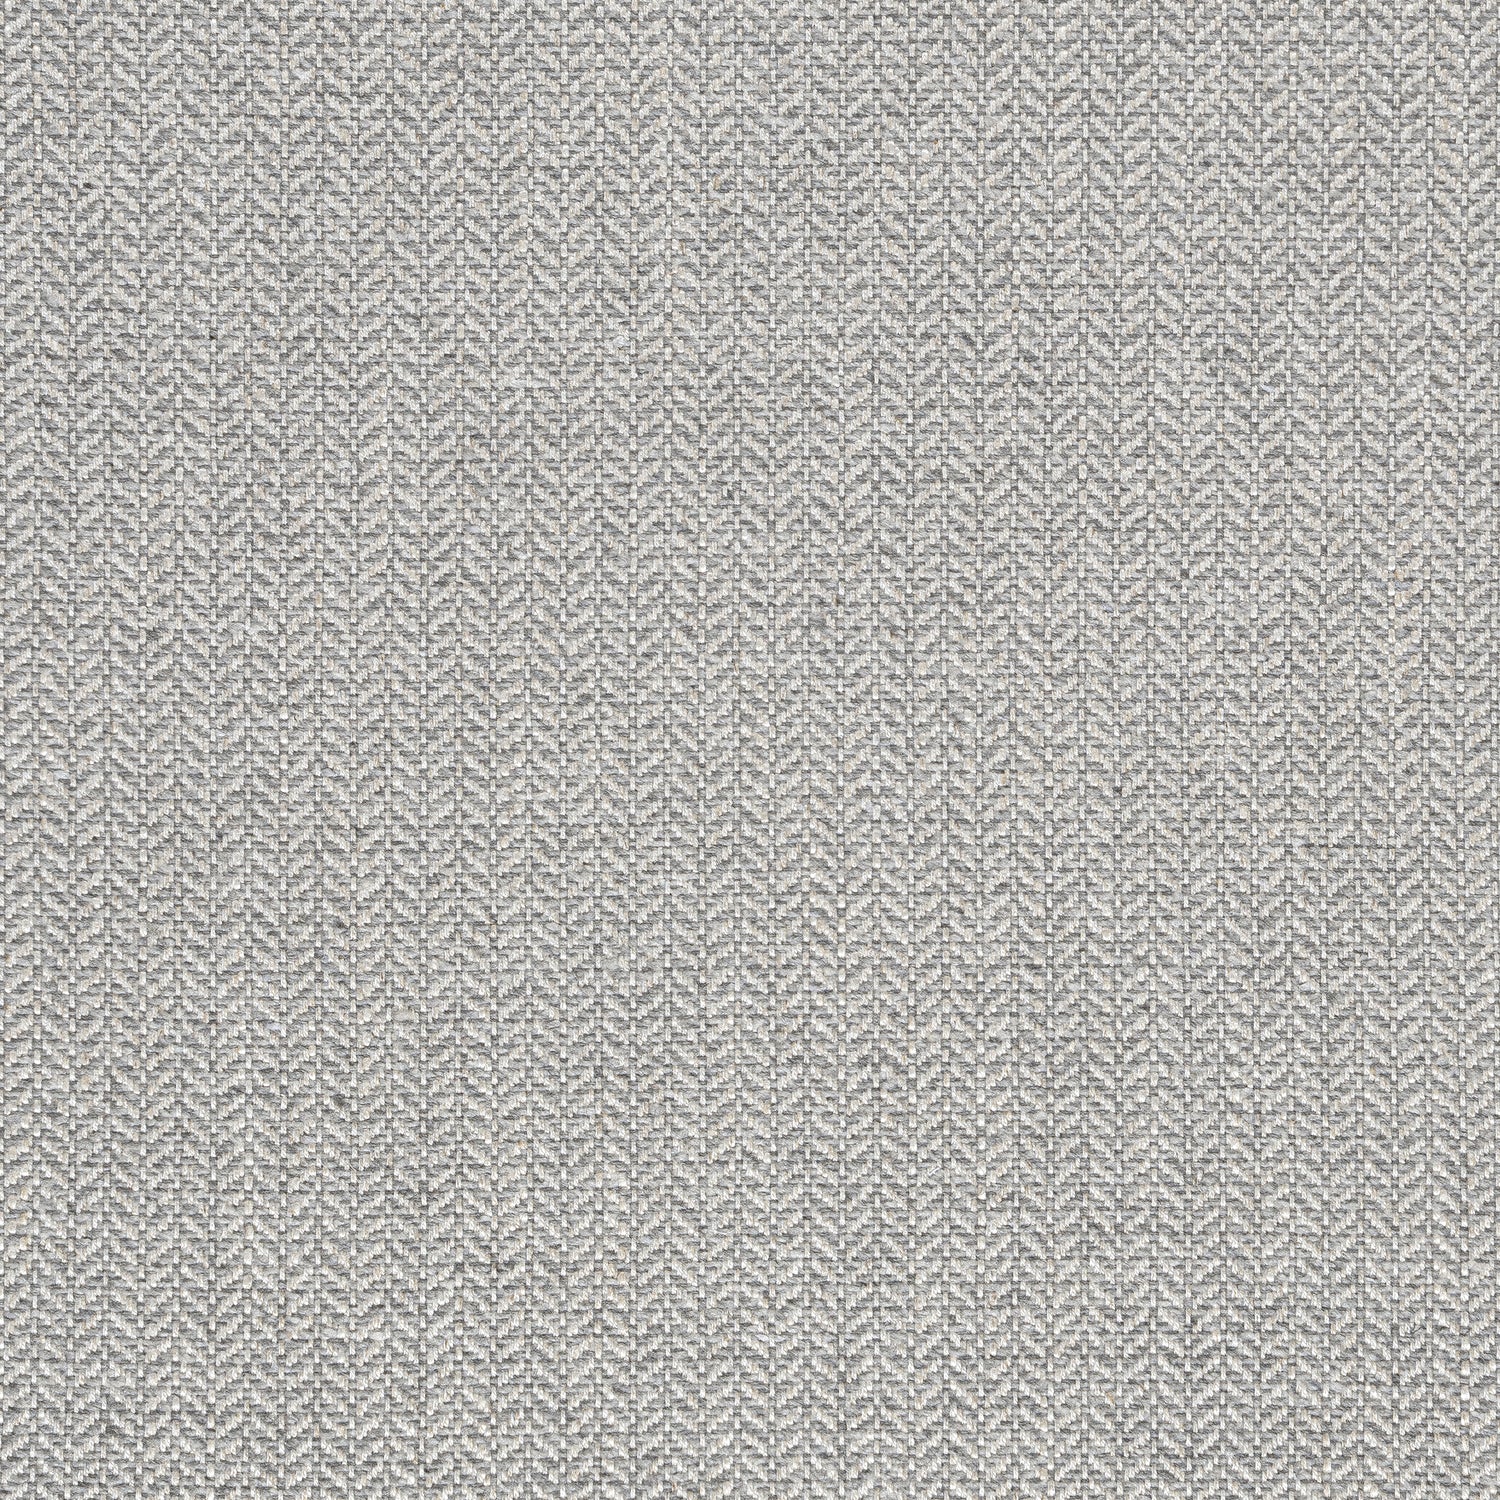 Heath fabric in smoke color - pattern number W80930 - by Thibaut in the Dunmore collection